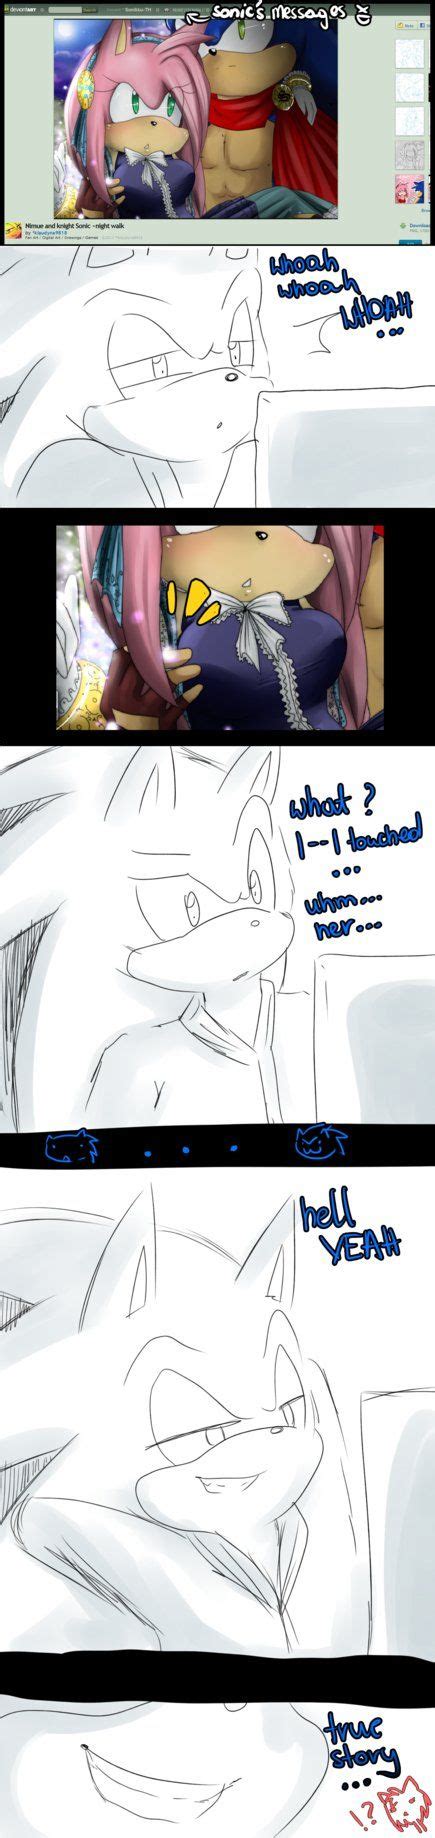 Sonic S Reaction By Klaudy Na On Deviantart In Sonic Sonic